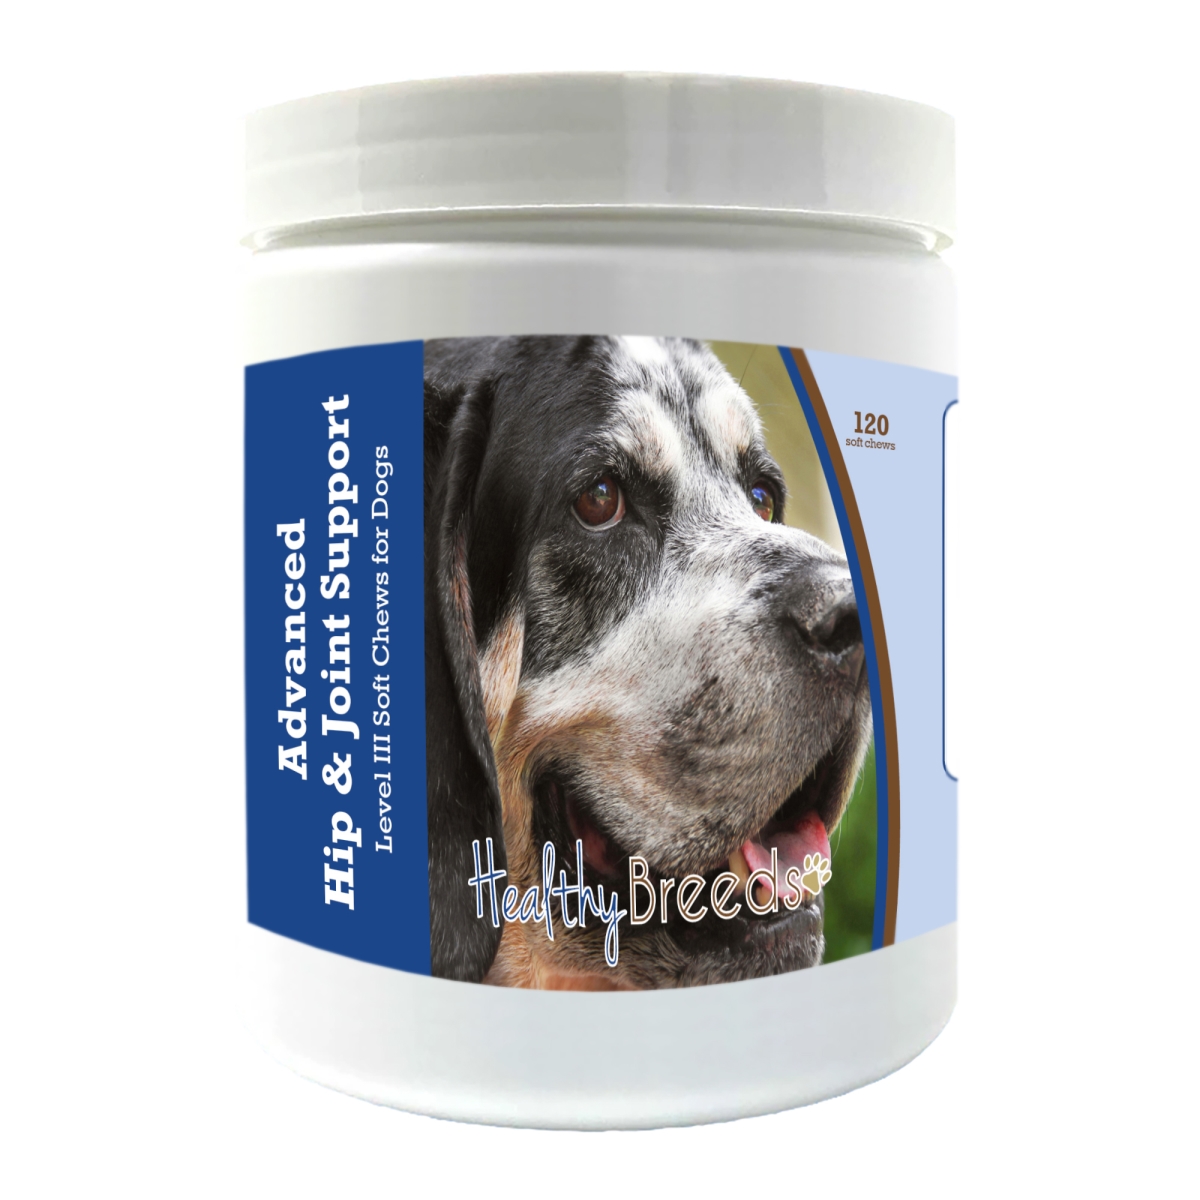 Picture of Healthy Breeds 192959897685 Bluetick Coonhound Advanced Hip & Joint Support Level III Soft Chews for Dogs